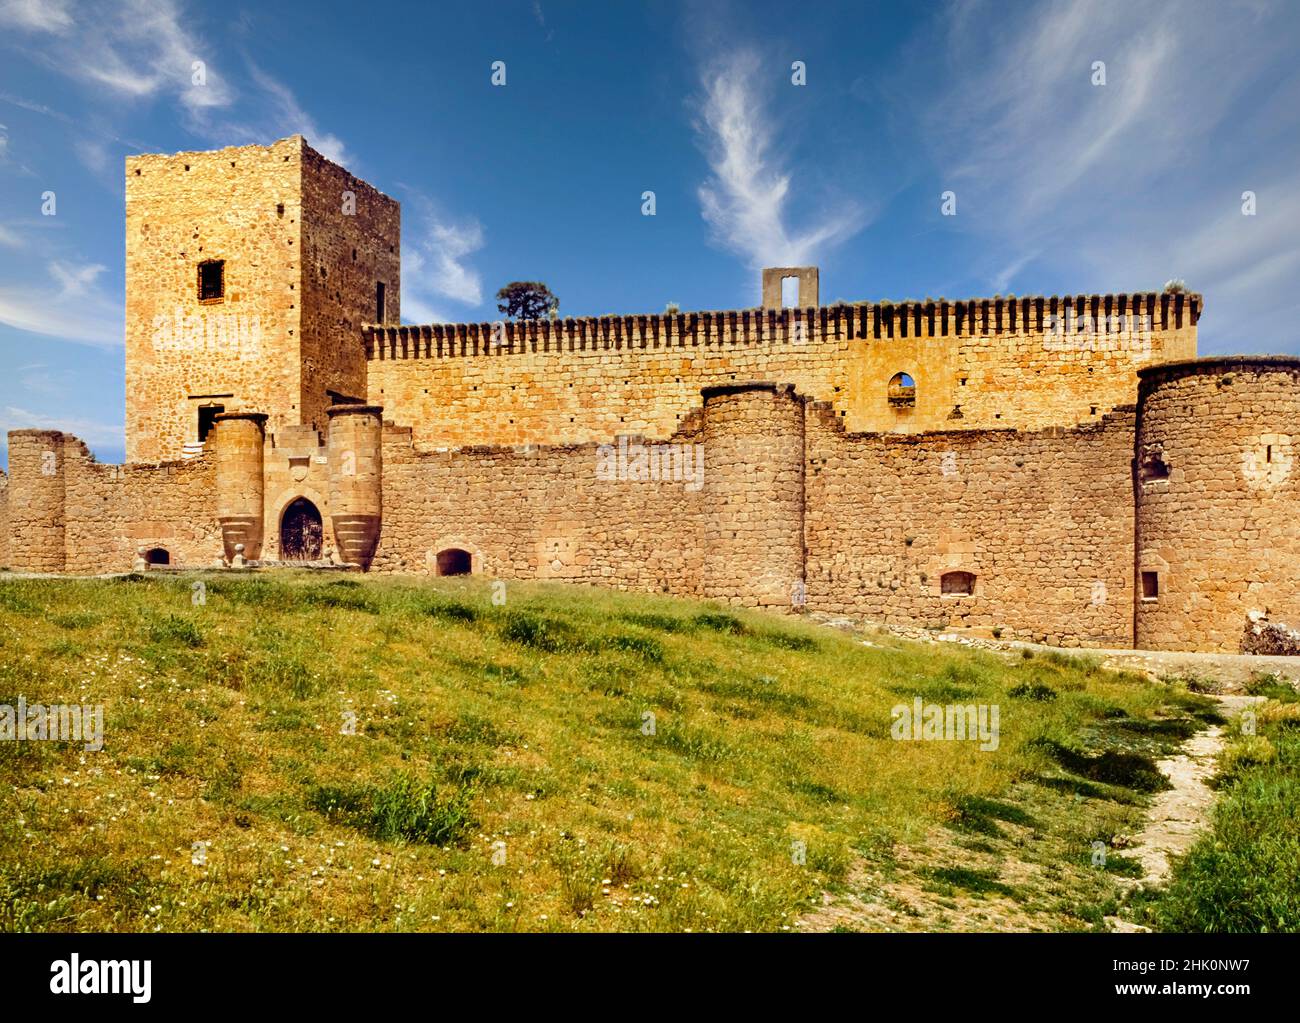 The original Fortress of Pedraza dates back to the 13th century and was heavily transformed in the fifteenth century.It was owned by the Herreras and Stock Photo